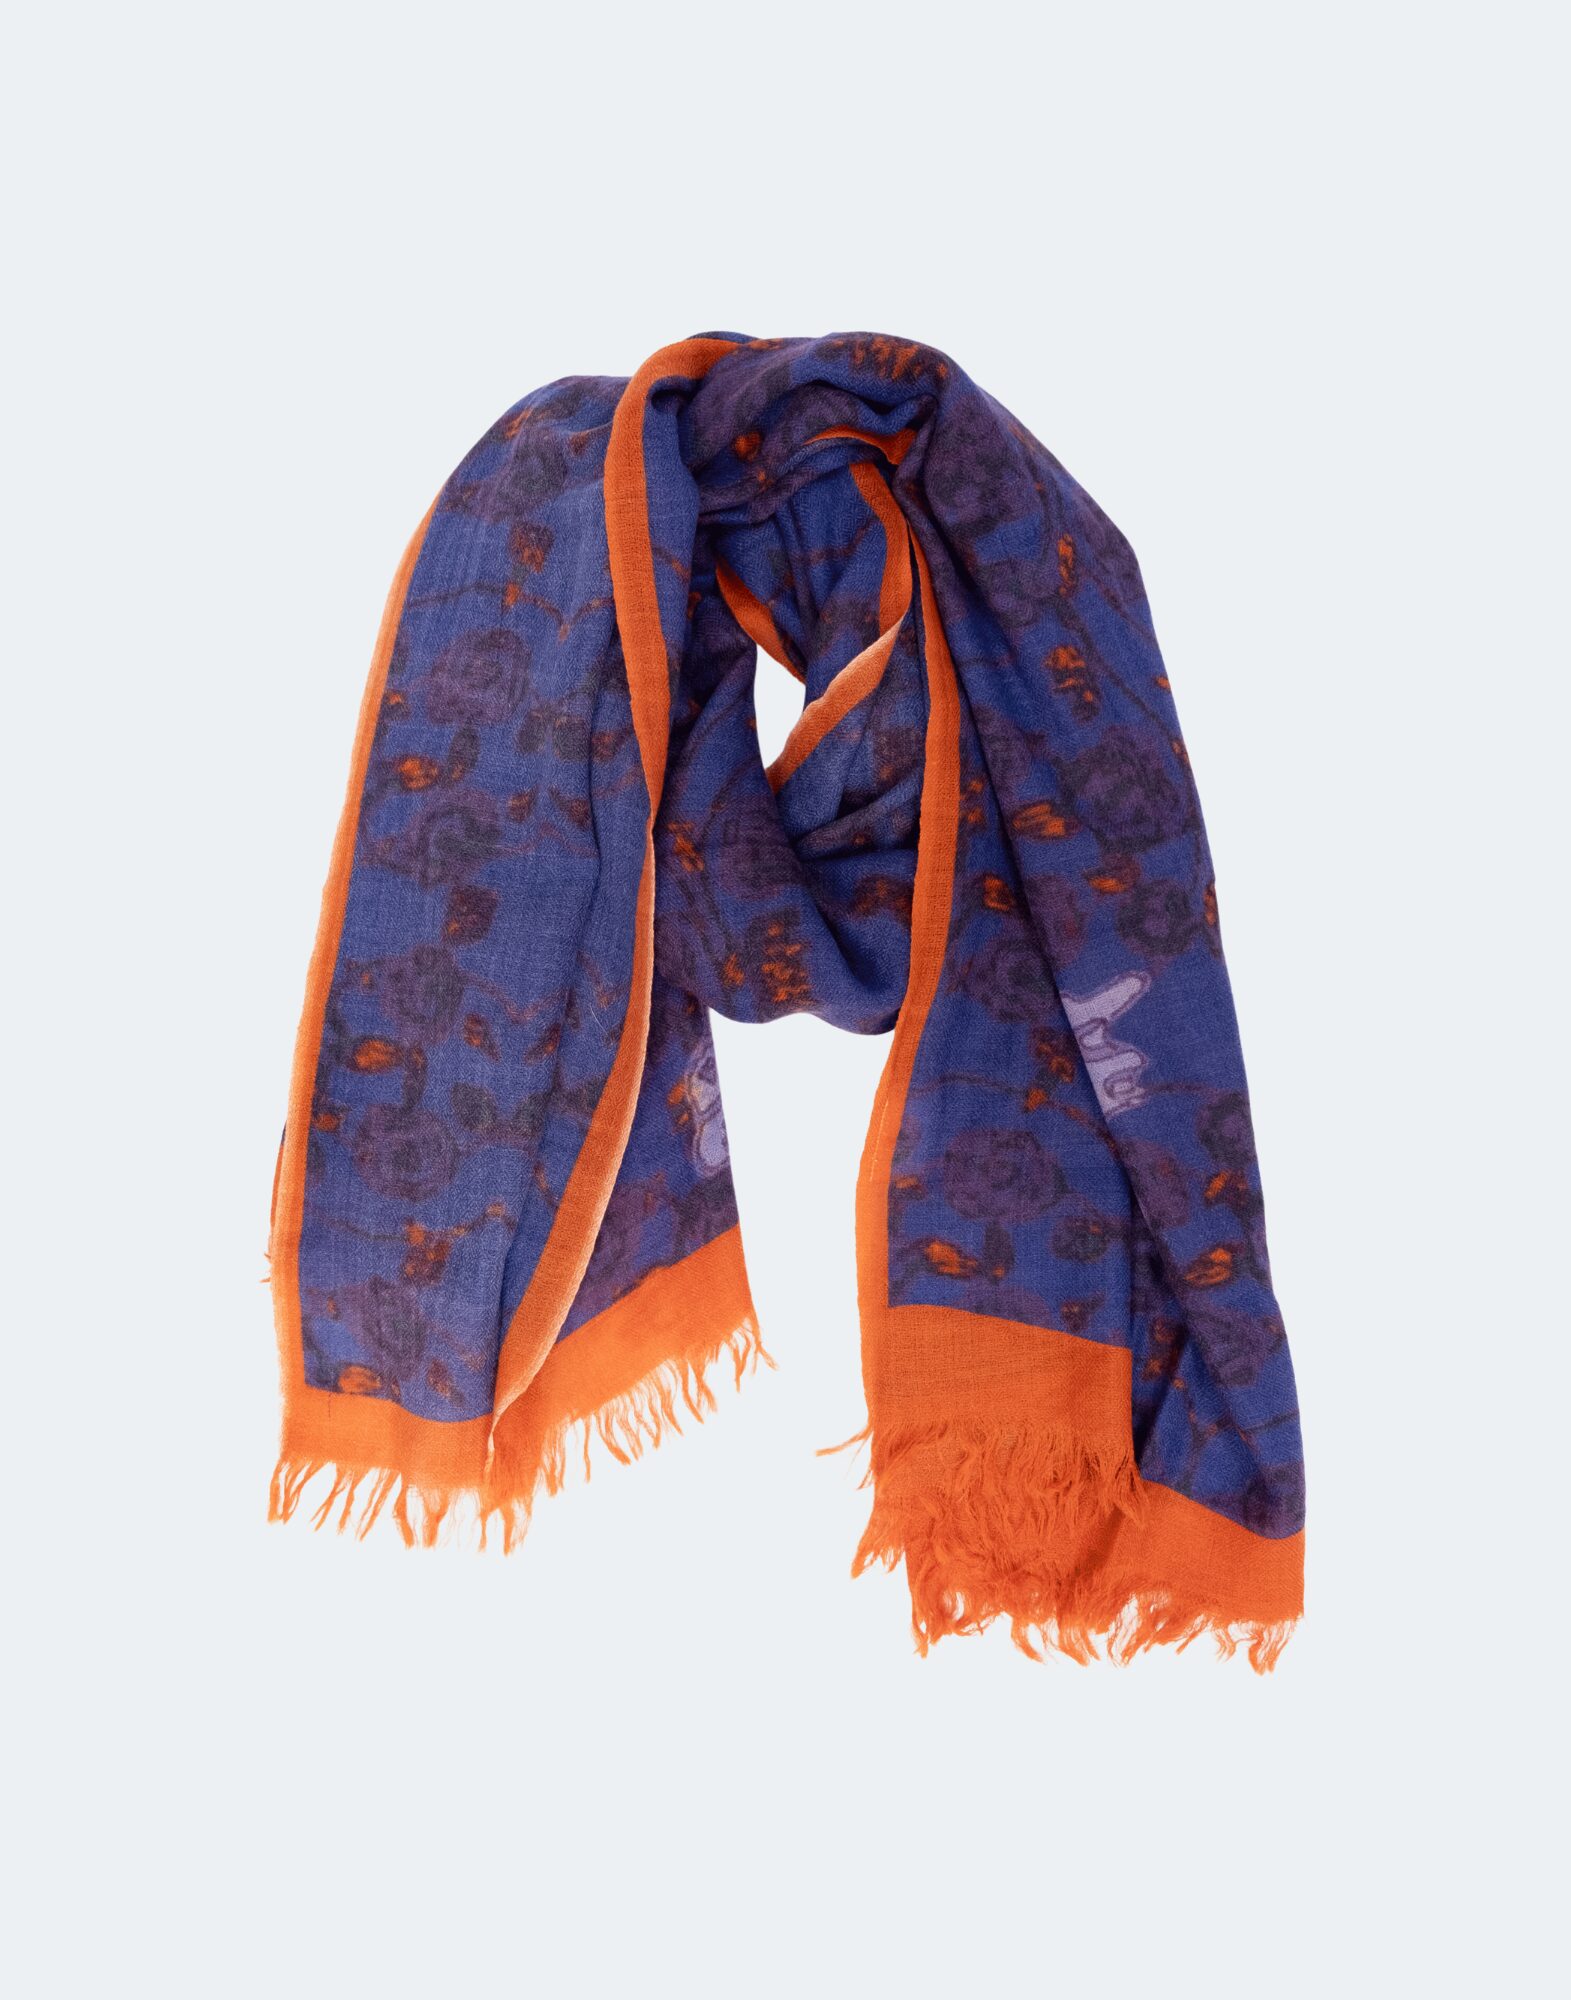 purple and orange scarf depicting a moth